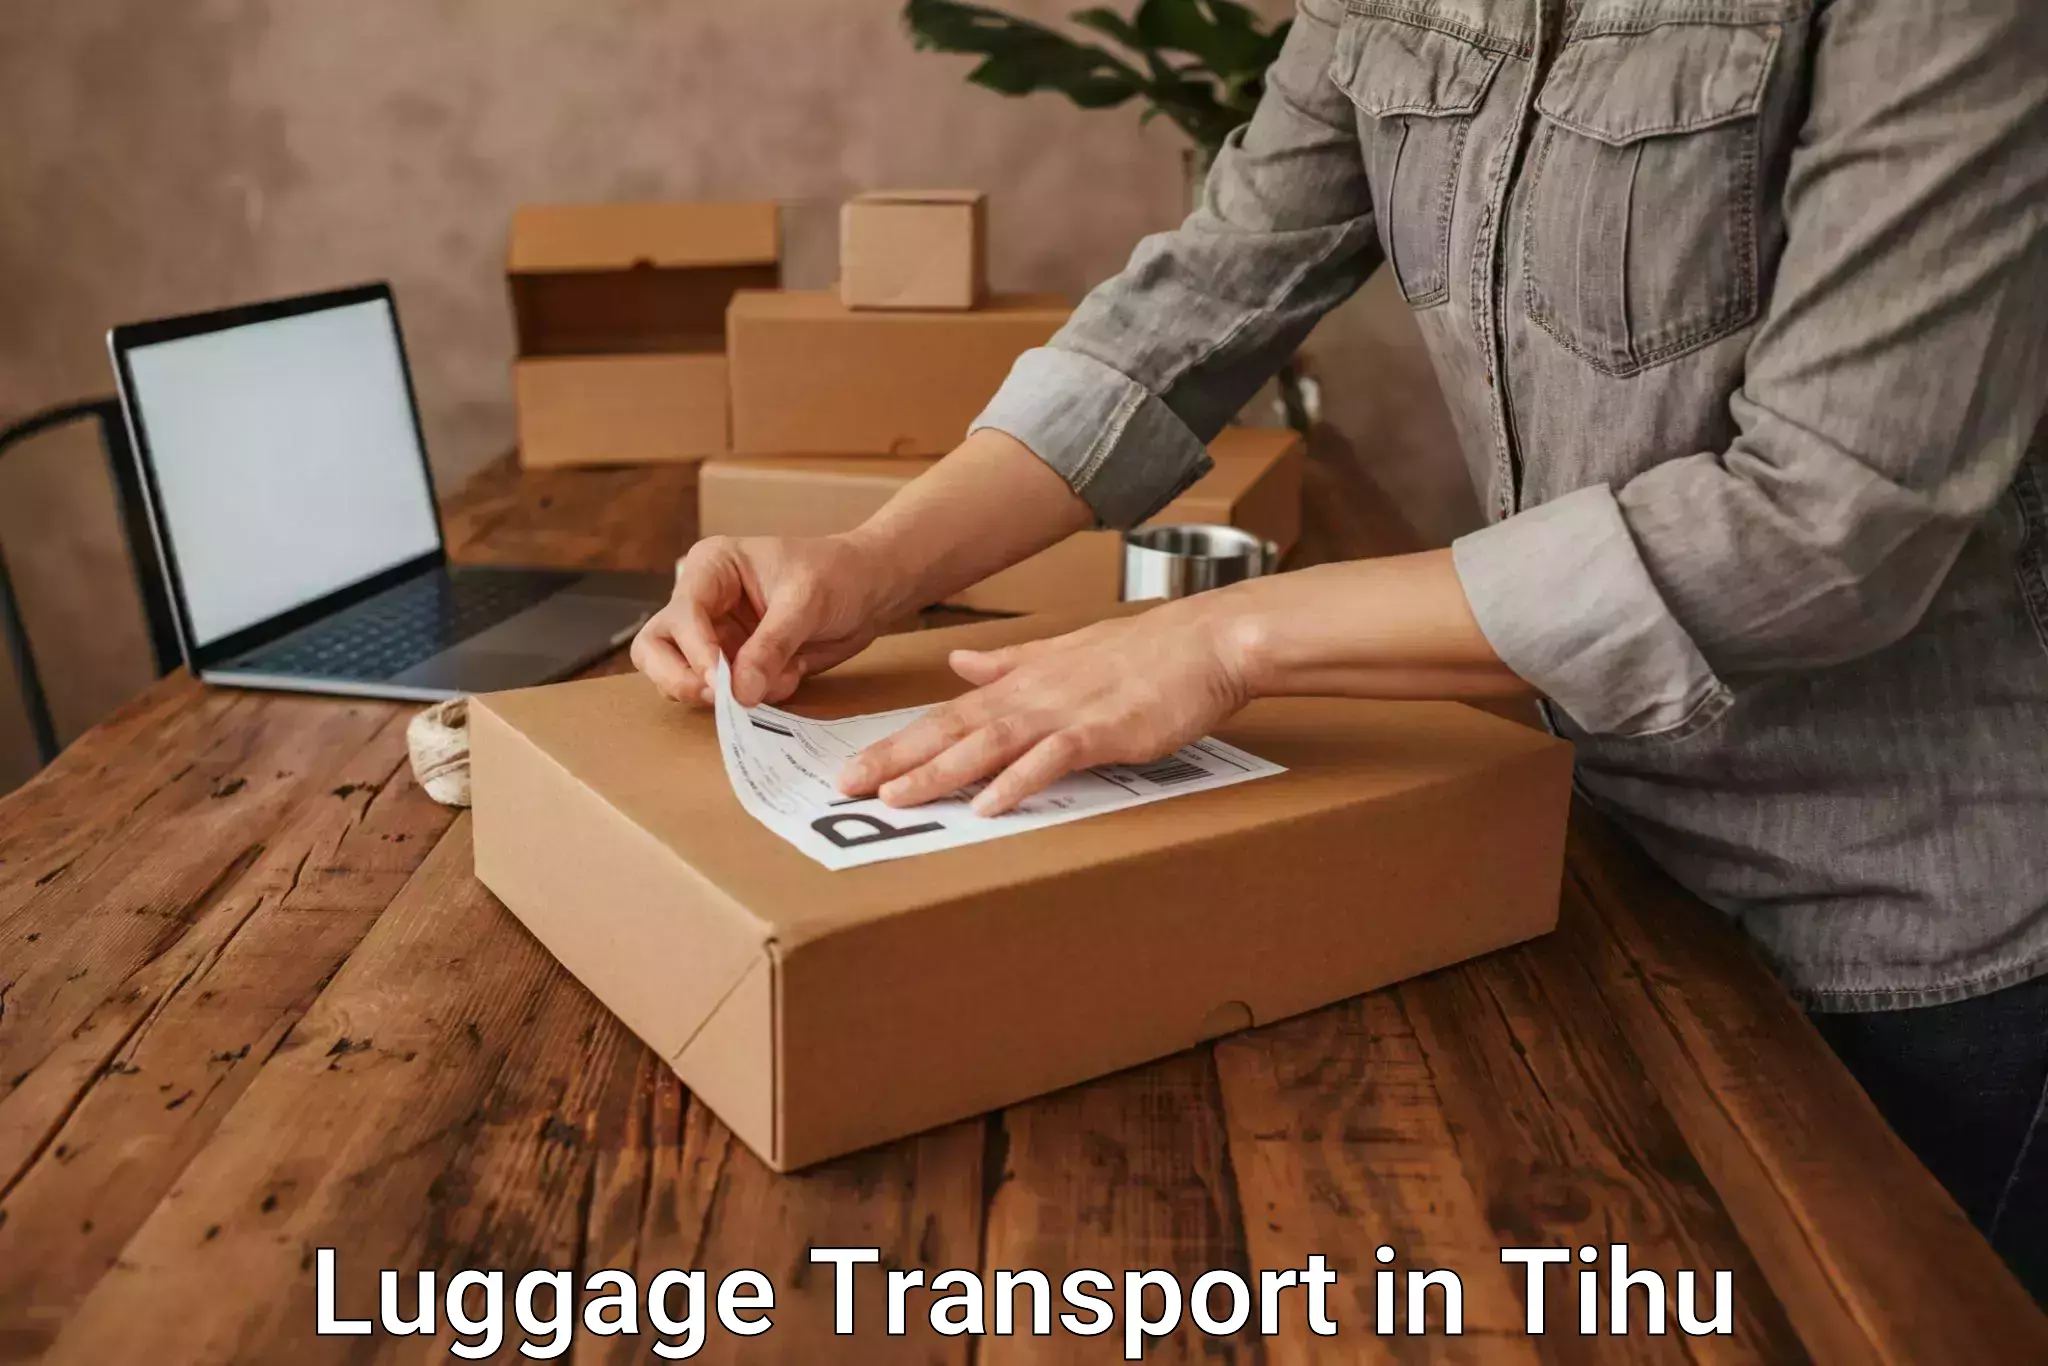 Baggage transport services in Tihu